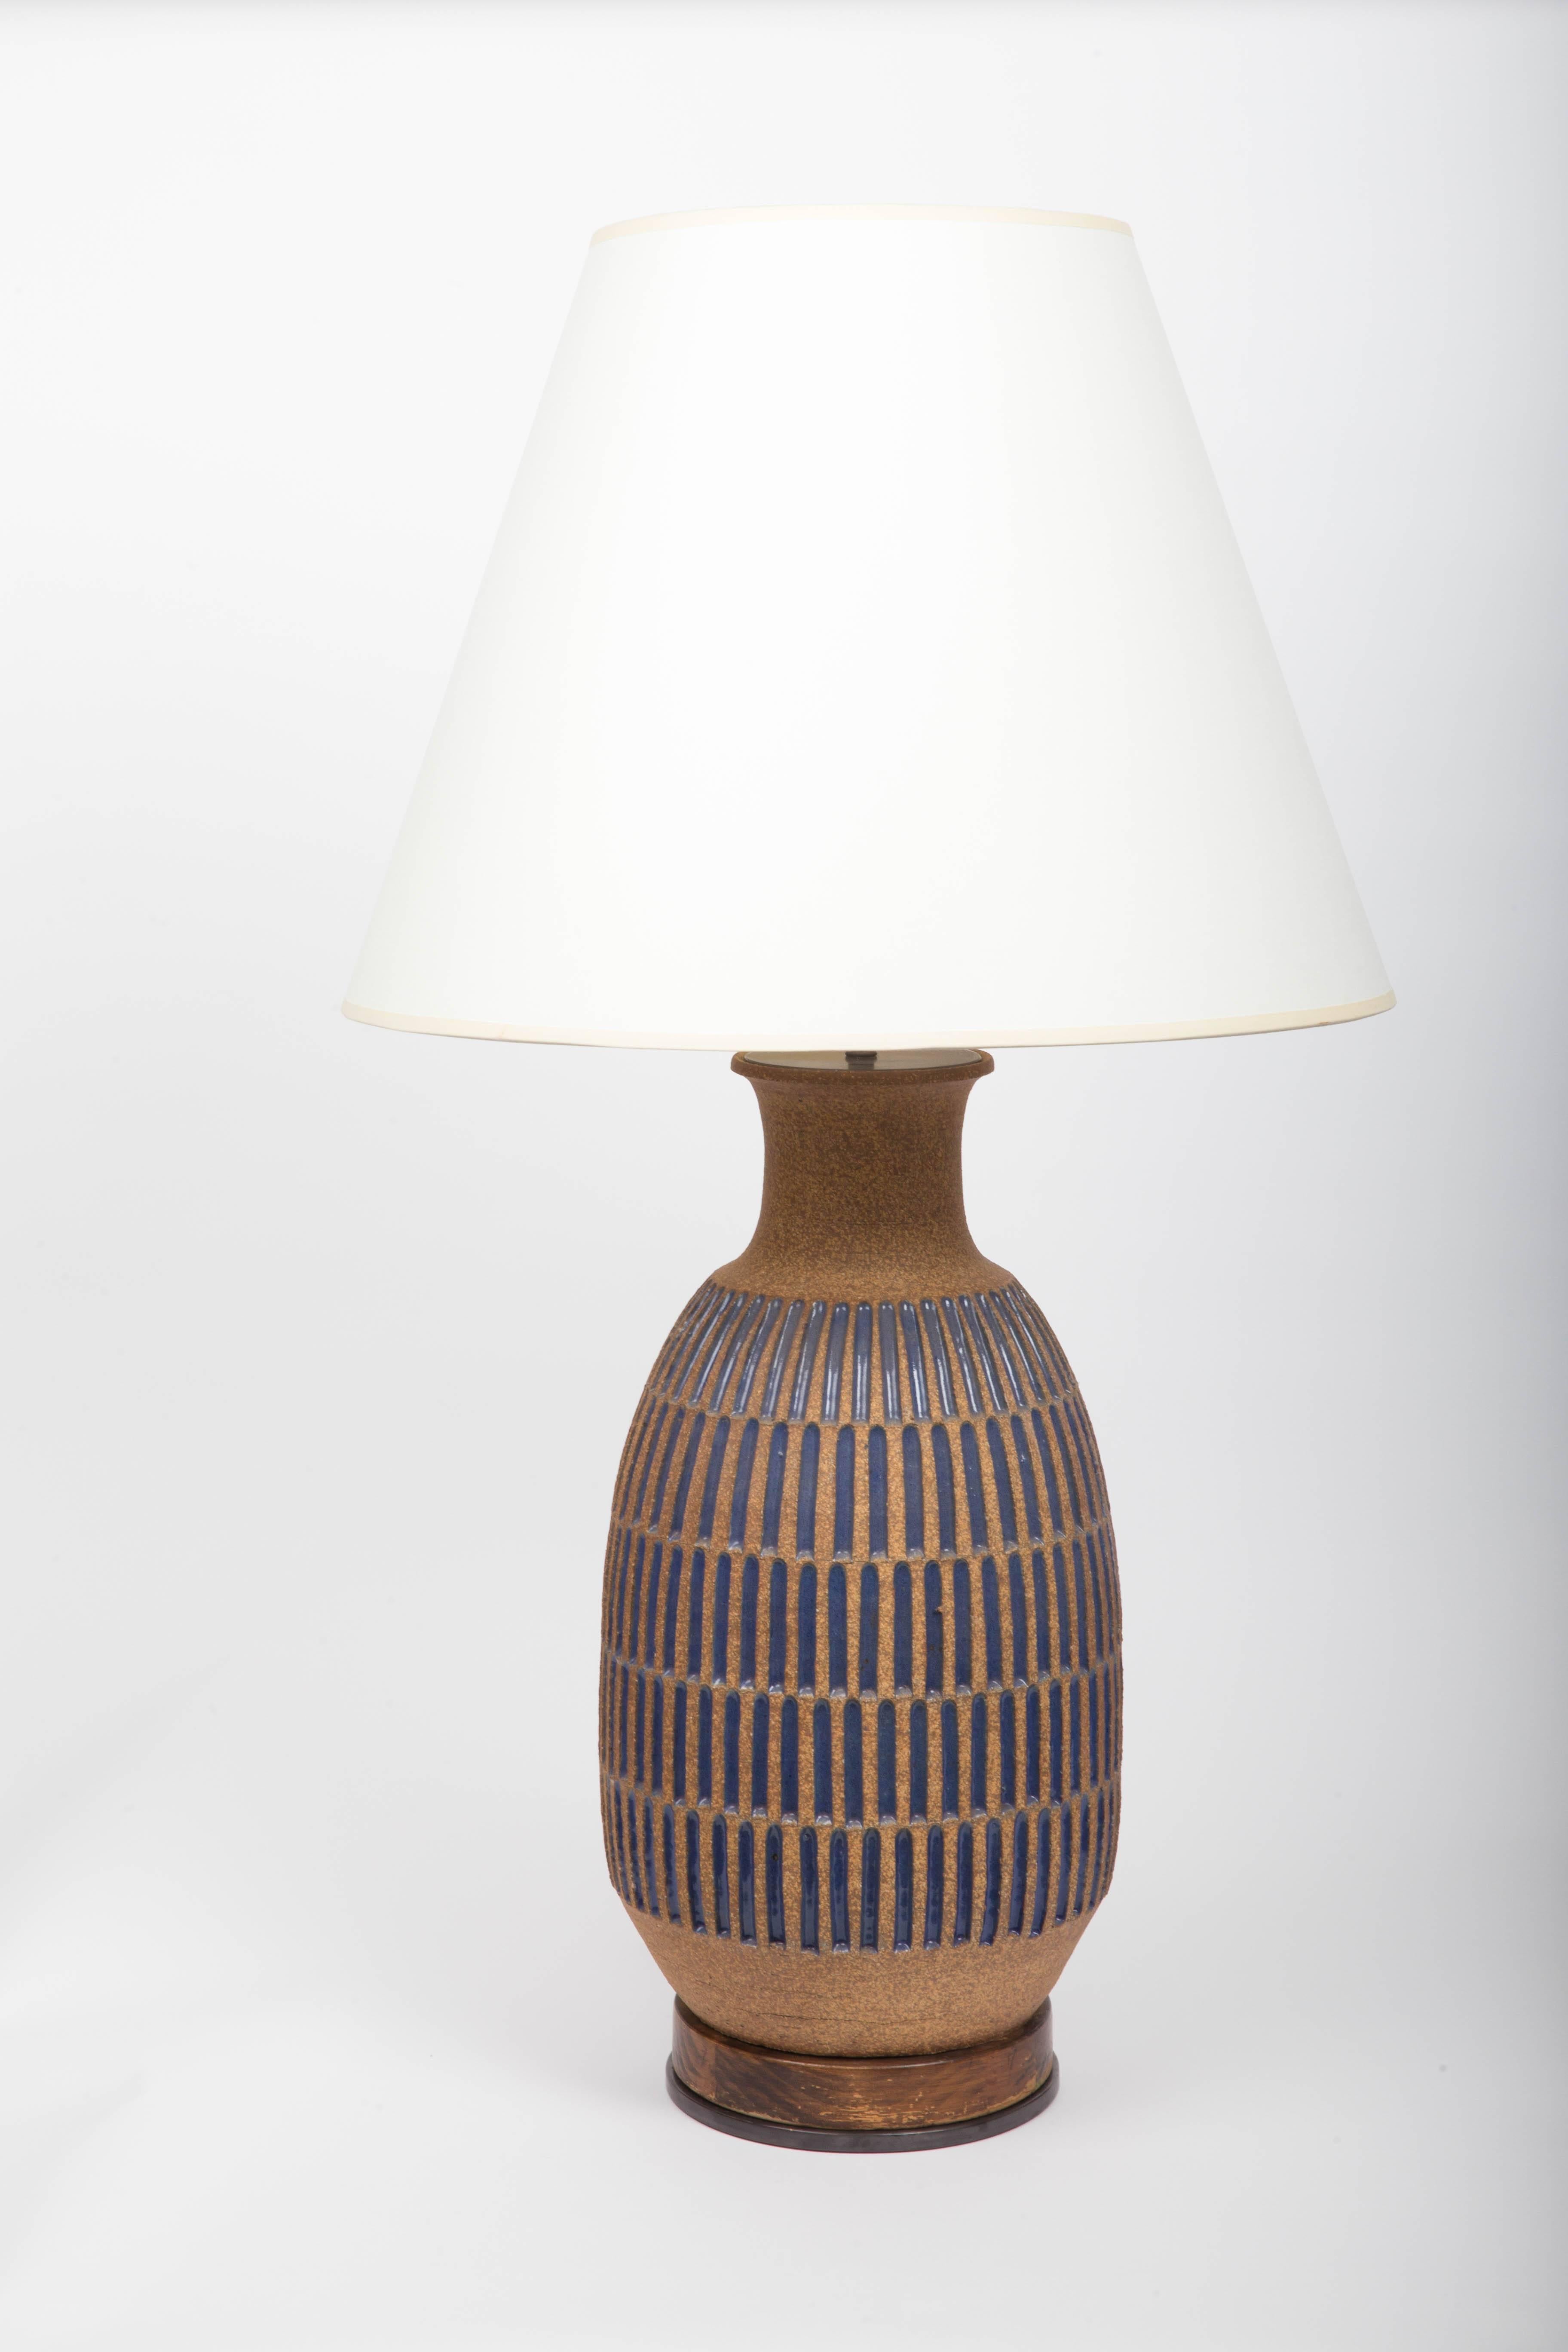 Blue Glaze Earthenware Table Lamp by David Cressey 1